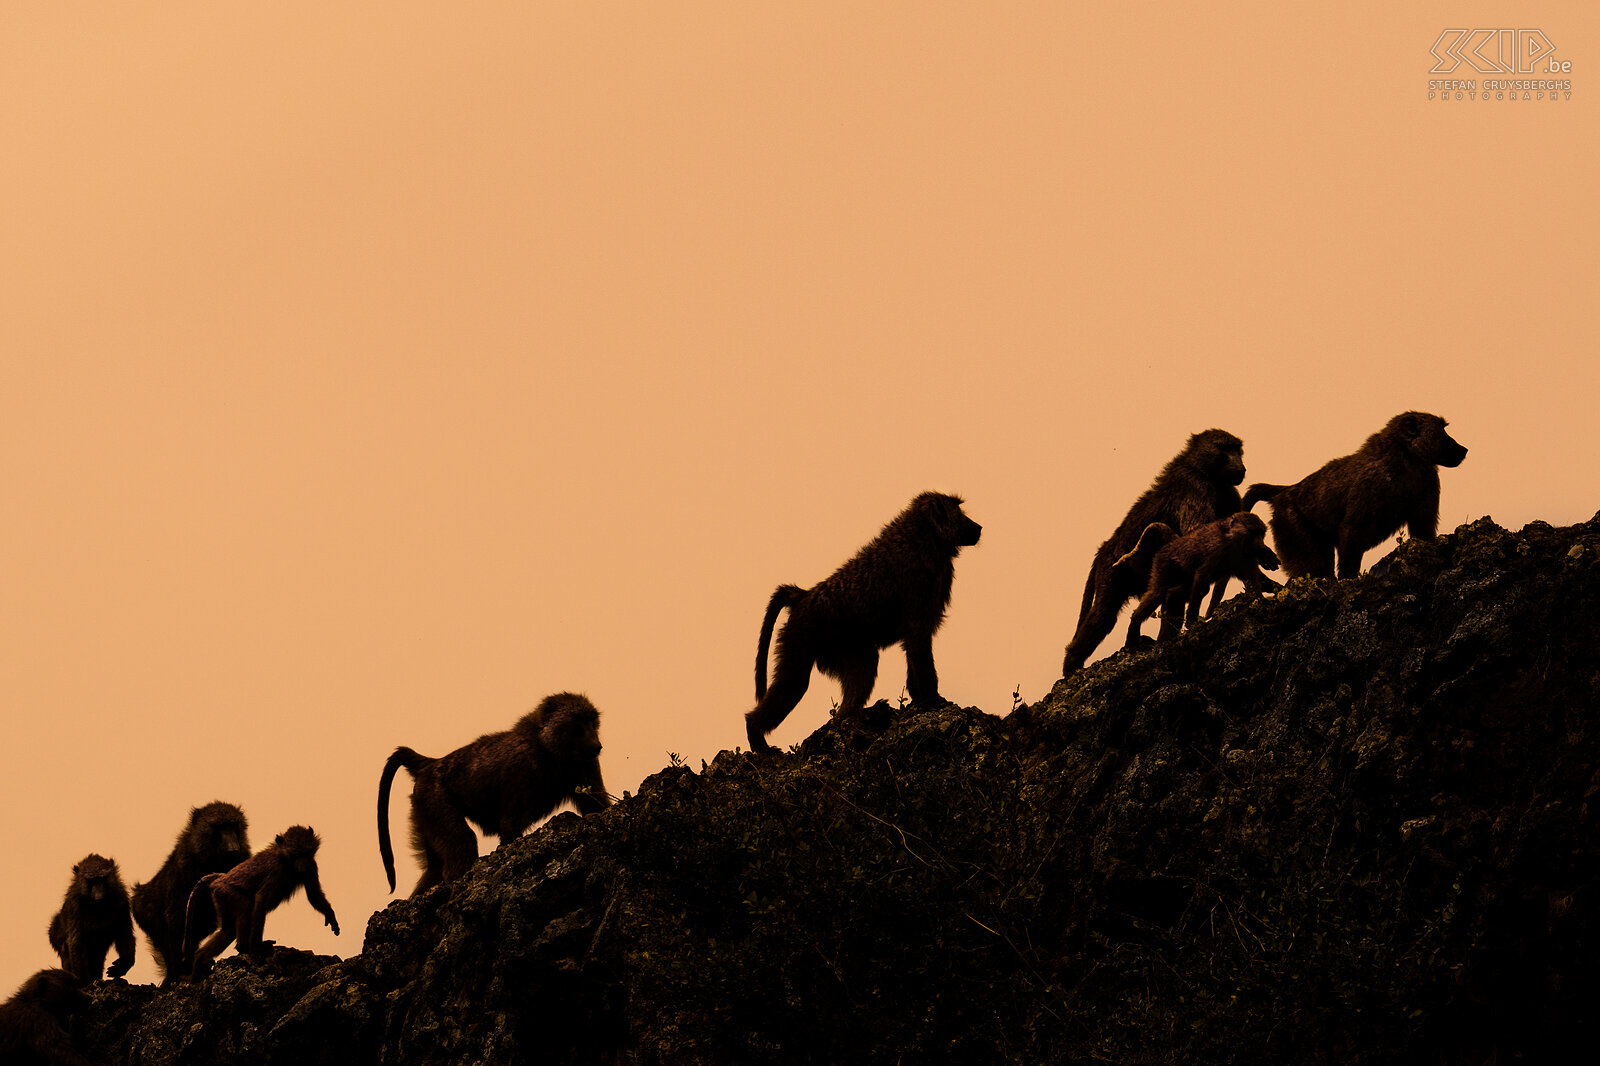 Debre Libanos - Olive baboons A group of olive baboons climbs out of the Jemma River Gorge in the late afternoon. Stefan Cruysberghs